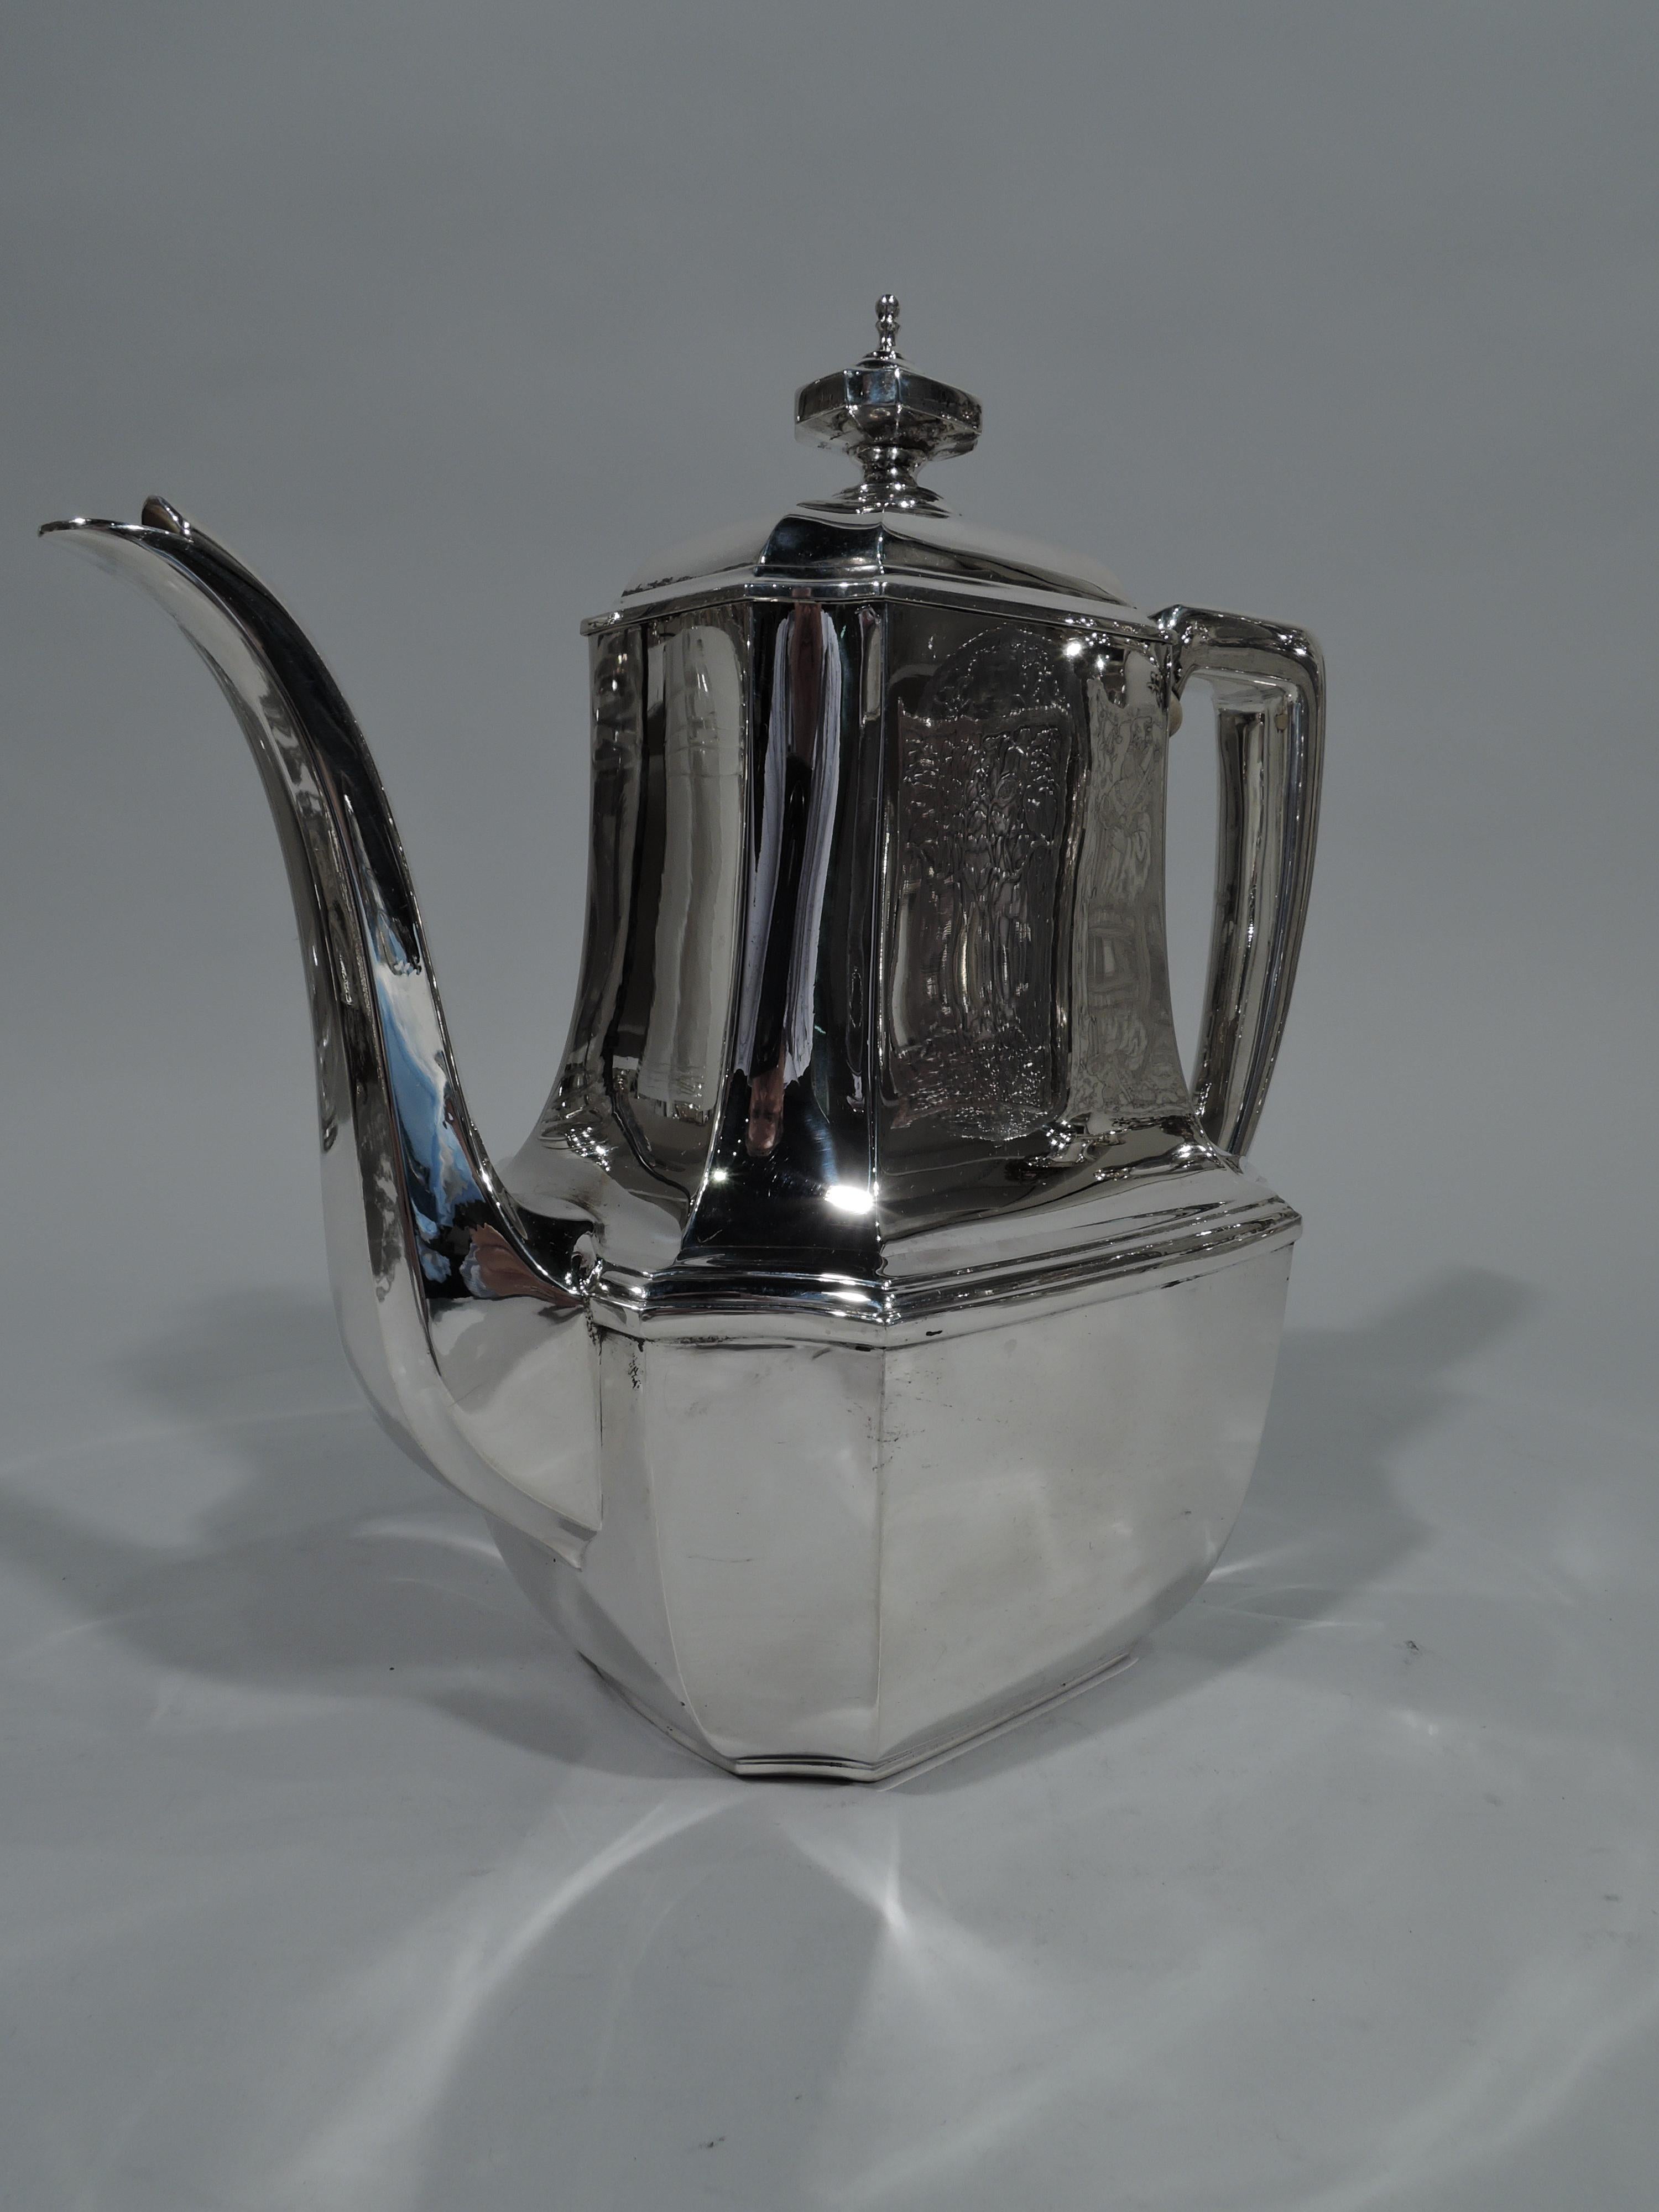 Art Deco sterling silver coffeepot in desirable Hampton. Made by Tiffany & Co. in New York. Rectilinear body with concave corners, faceted s-spout, scroll-bracket handle, and hinged and domed cover with finial. A great piece in the enduringly